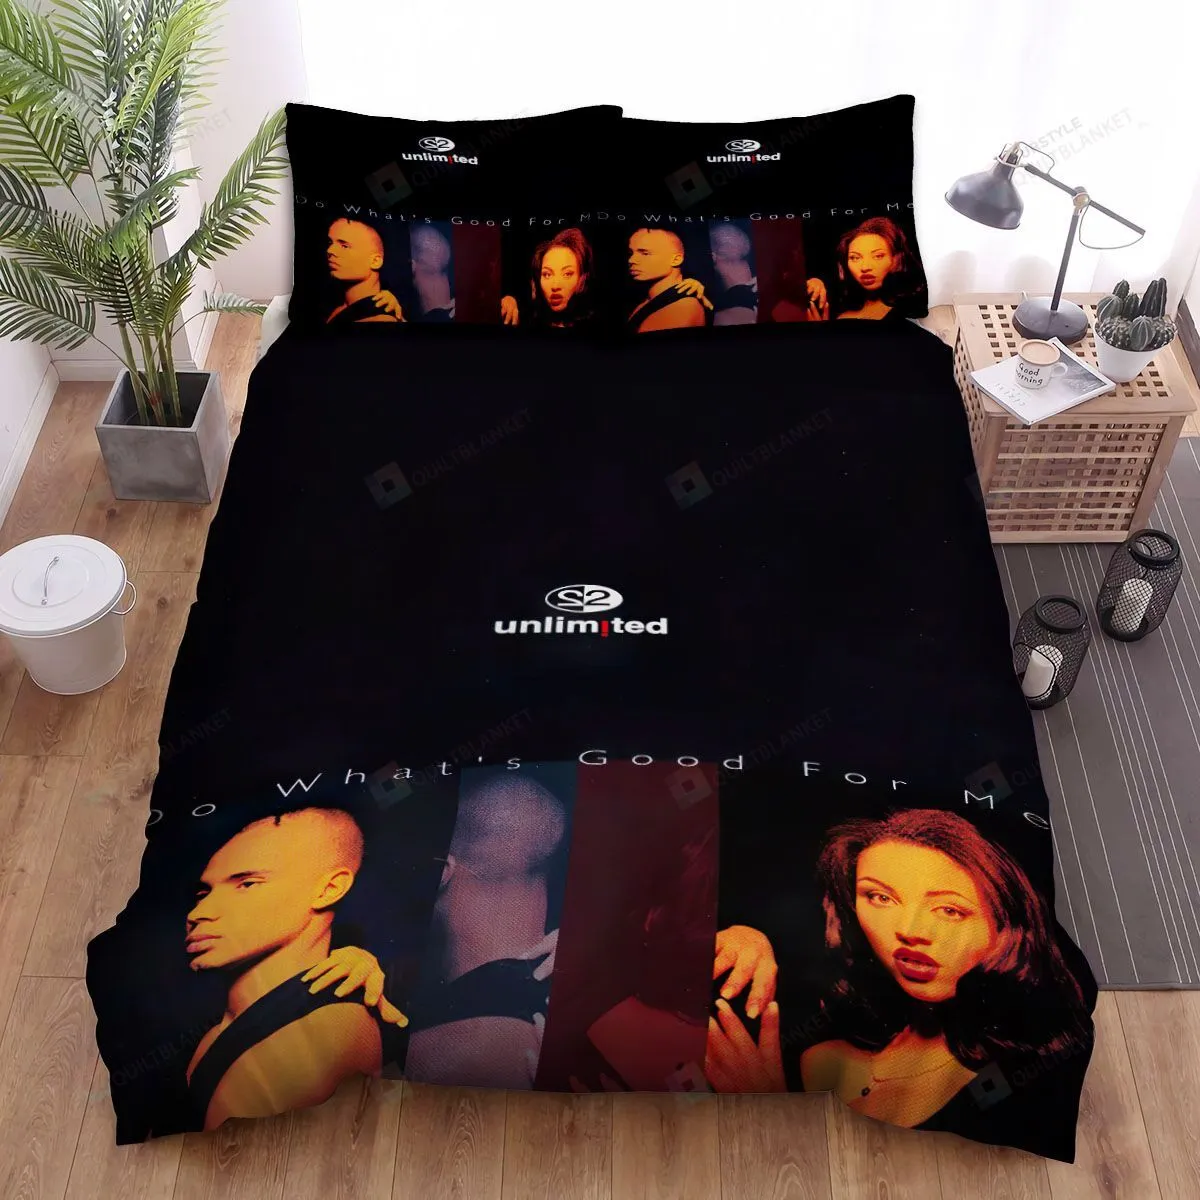 2 Unlimited Do What's Good For Me Bed Sheets Spread Comforter Duvet Cover Bedding Sets